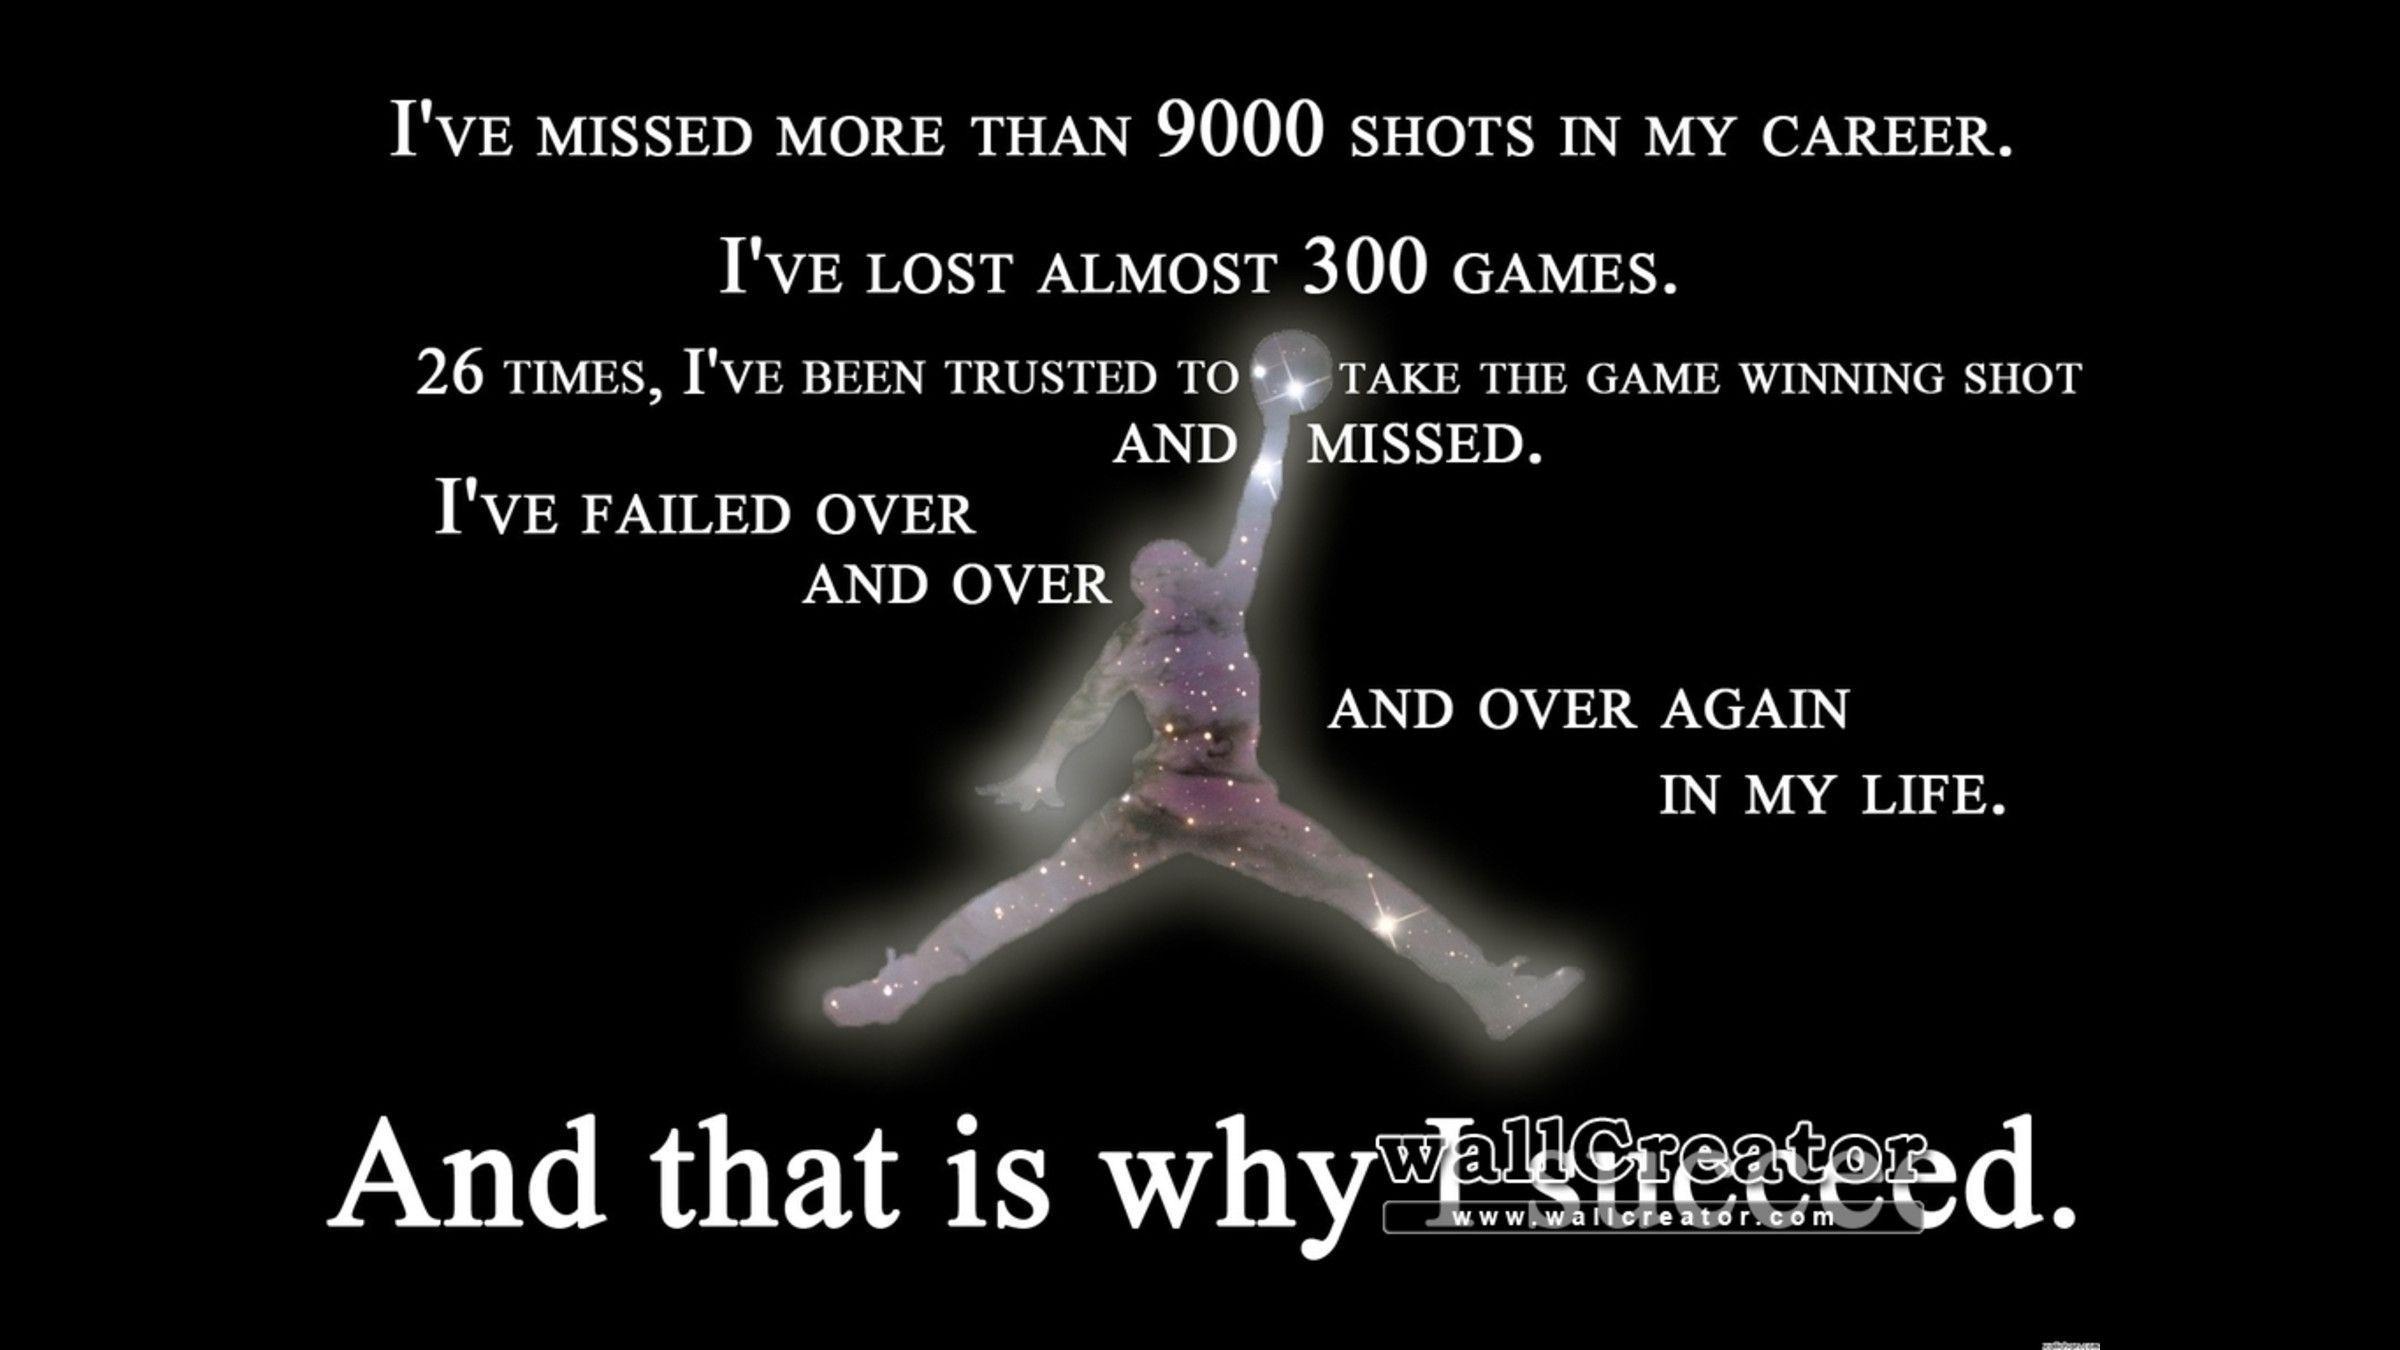 Michael Jordan Quote Pictures from our First page